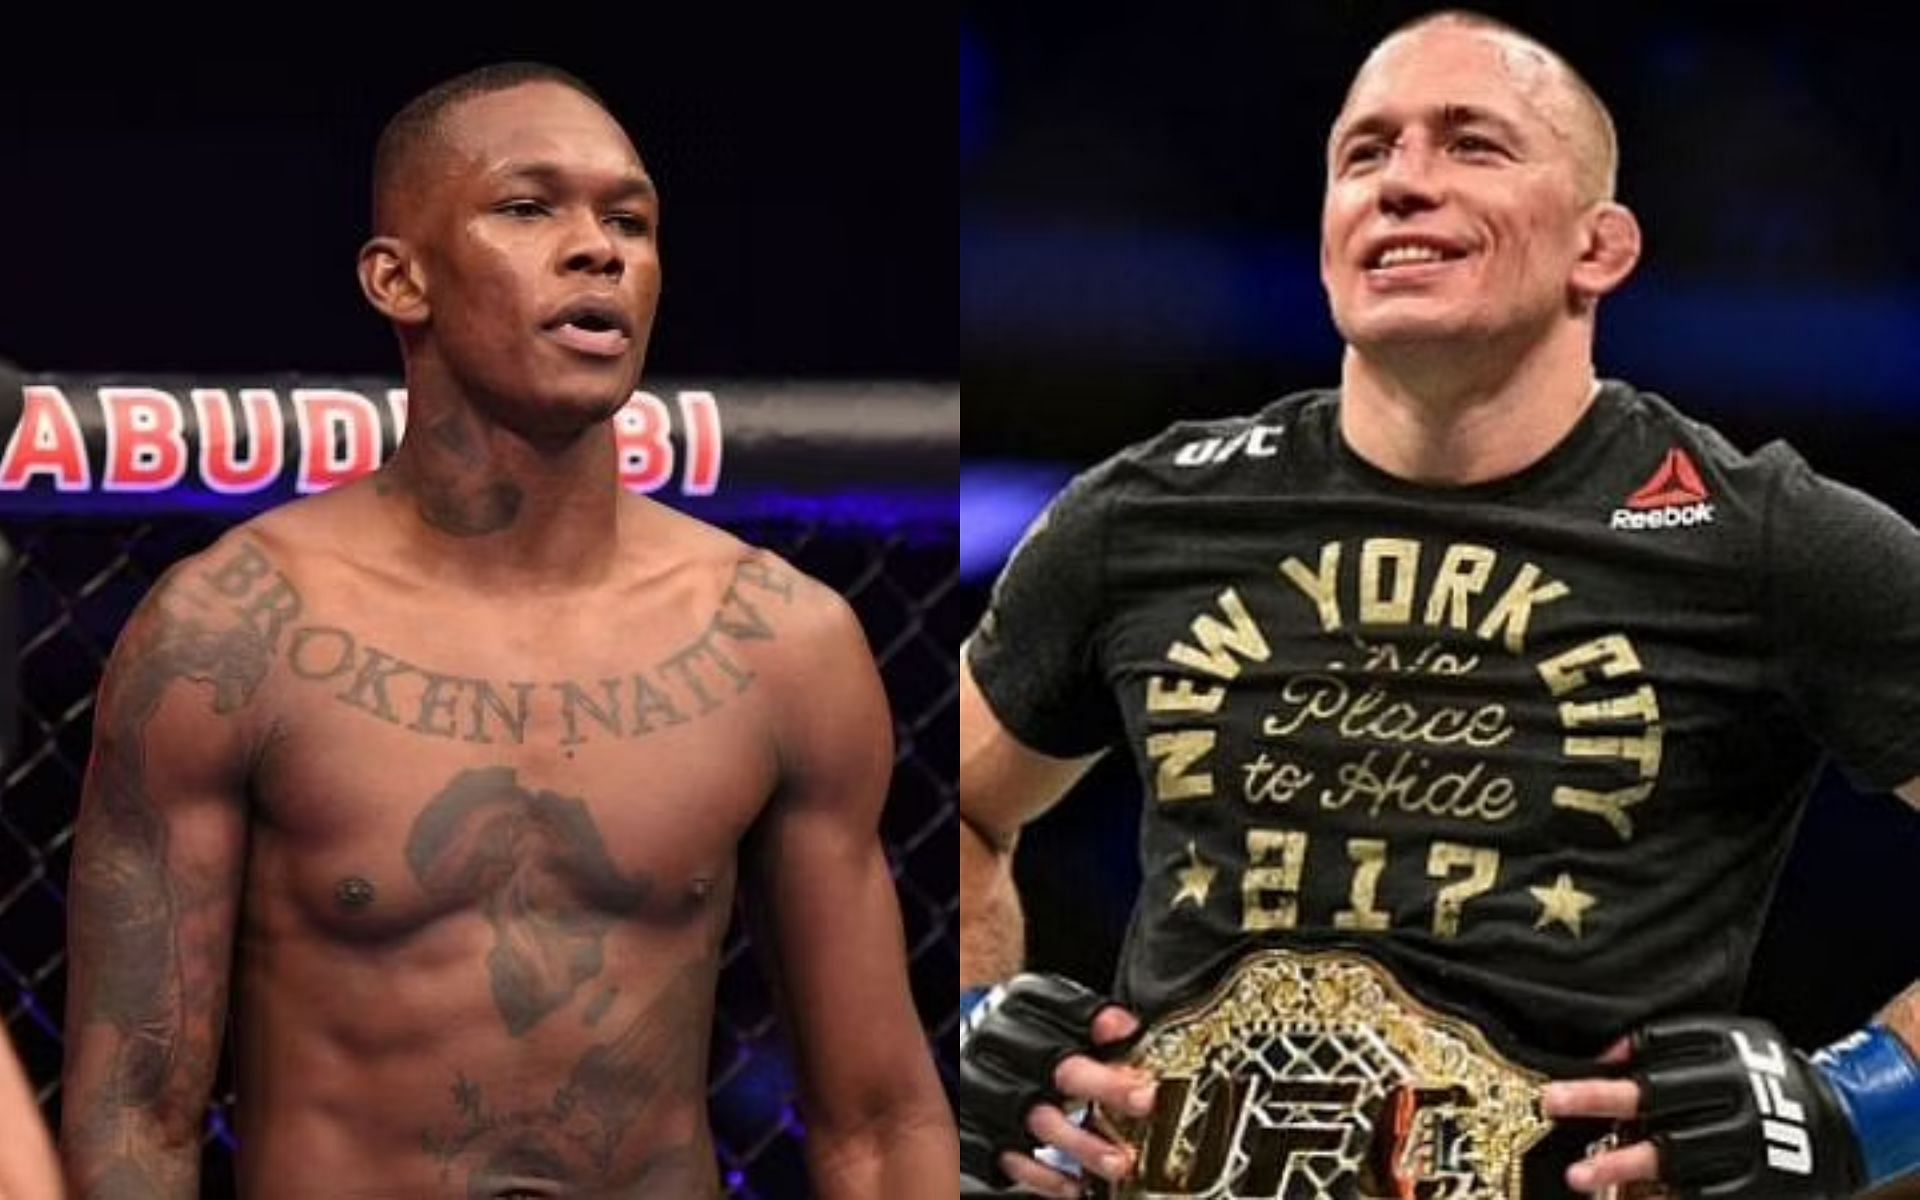 Israel Adesanya (left) and Georges St-Pierre (right)